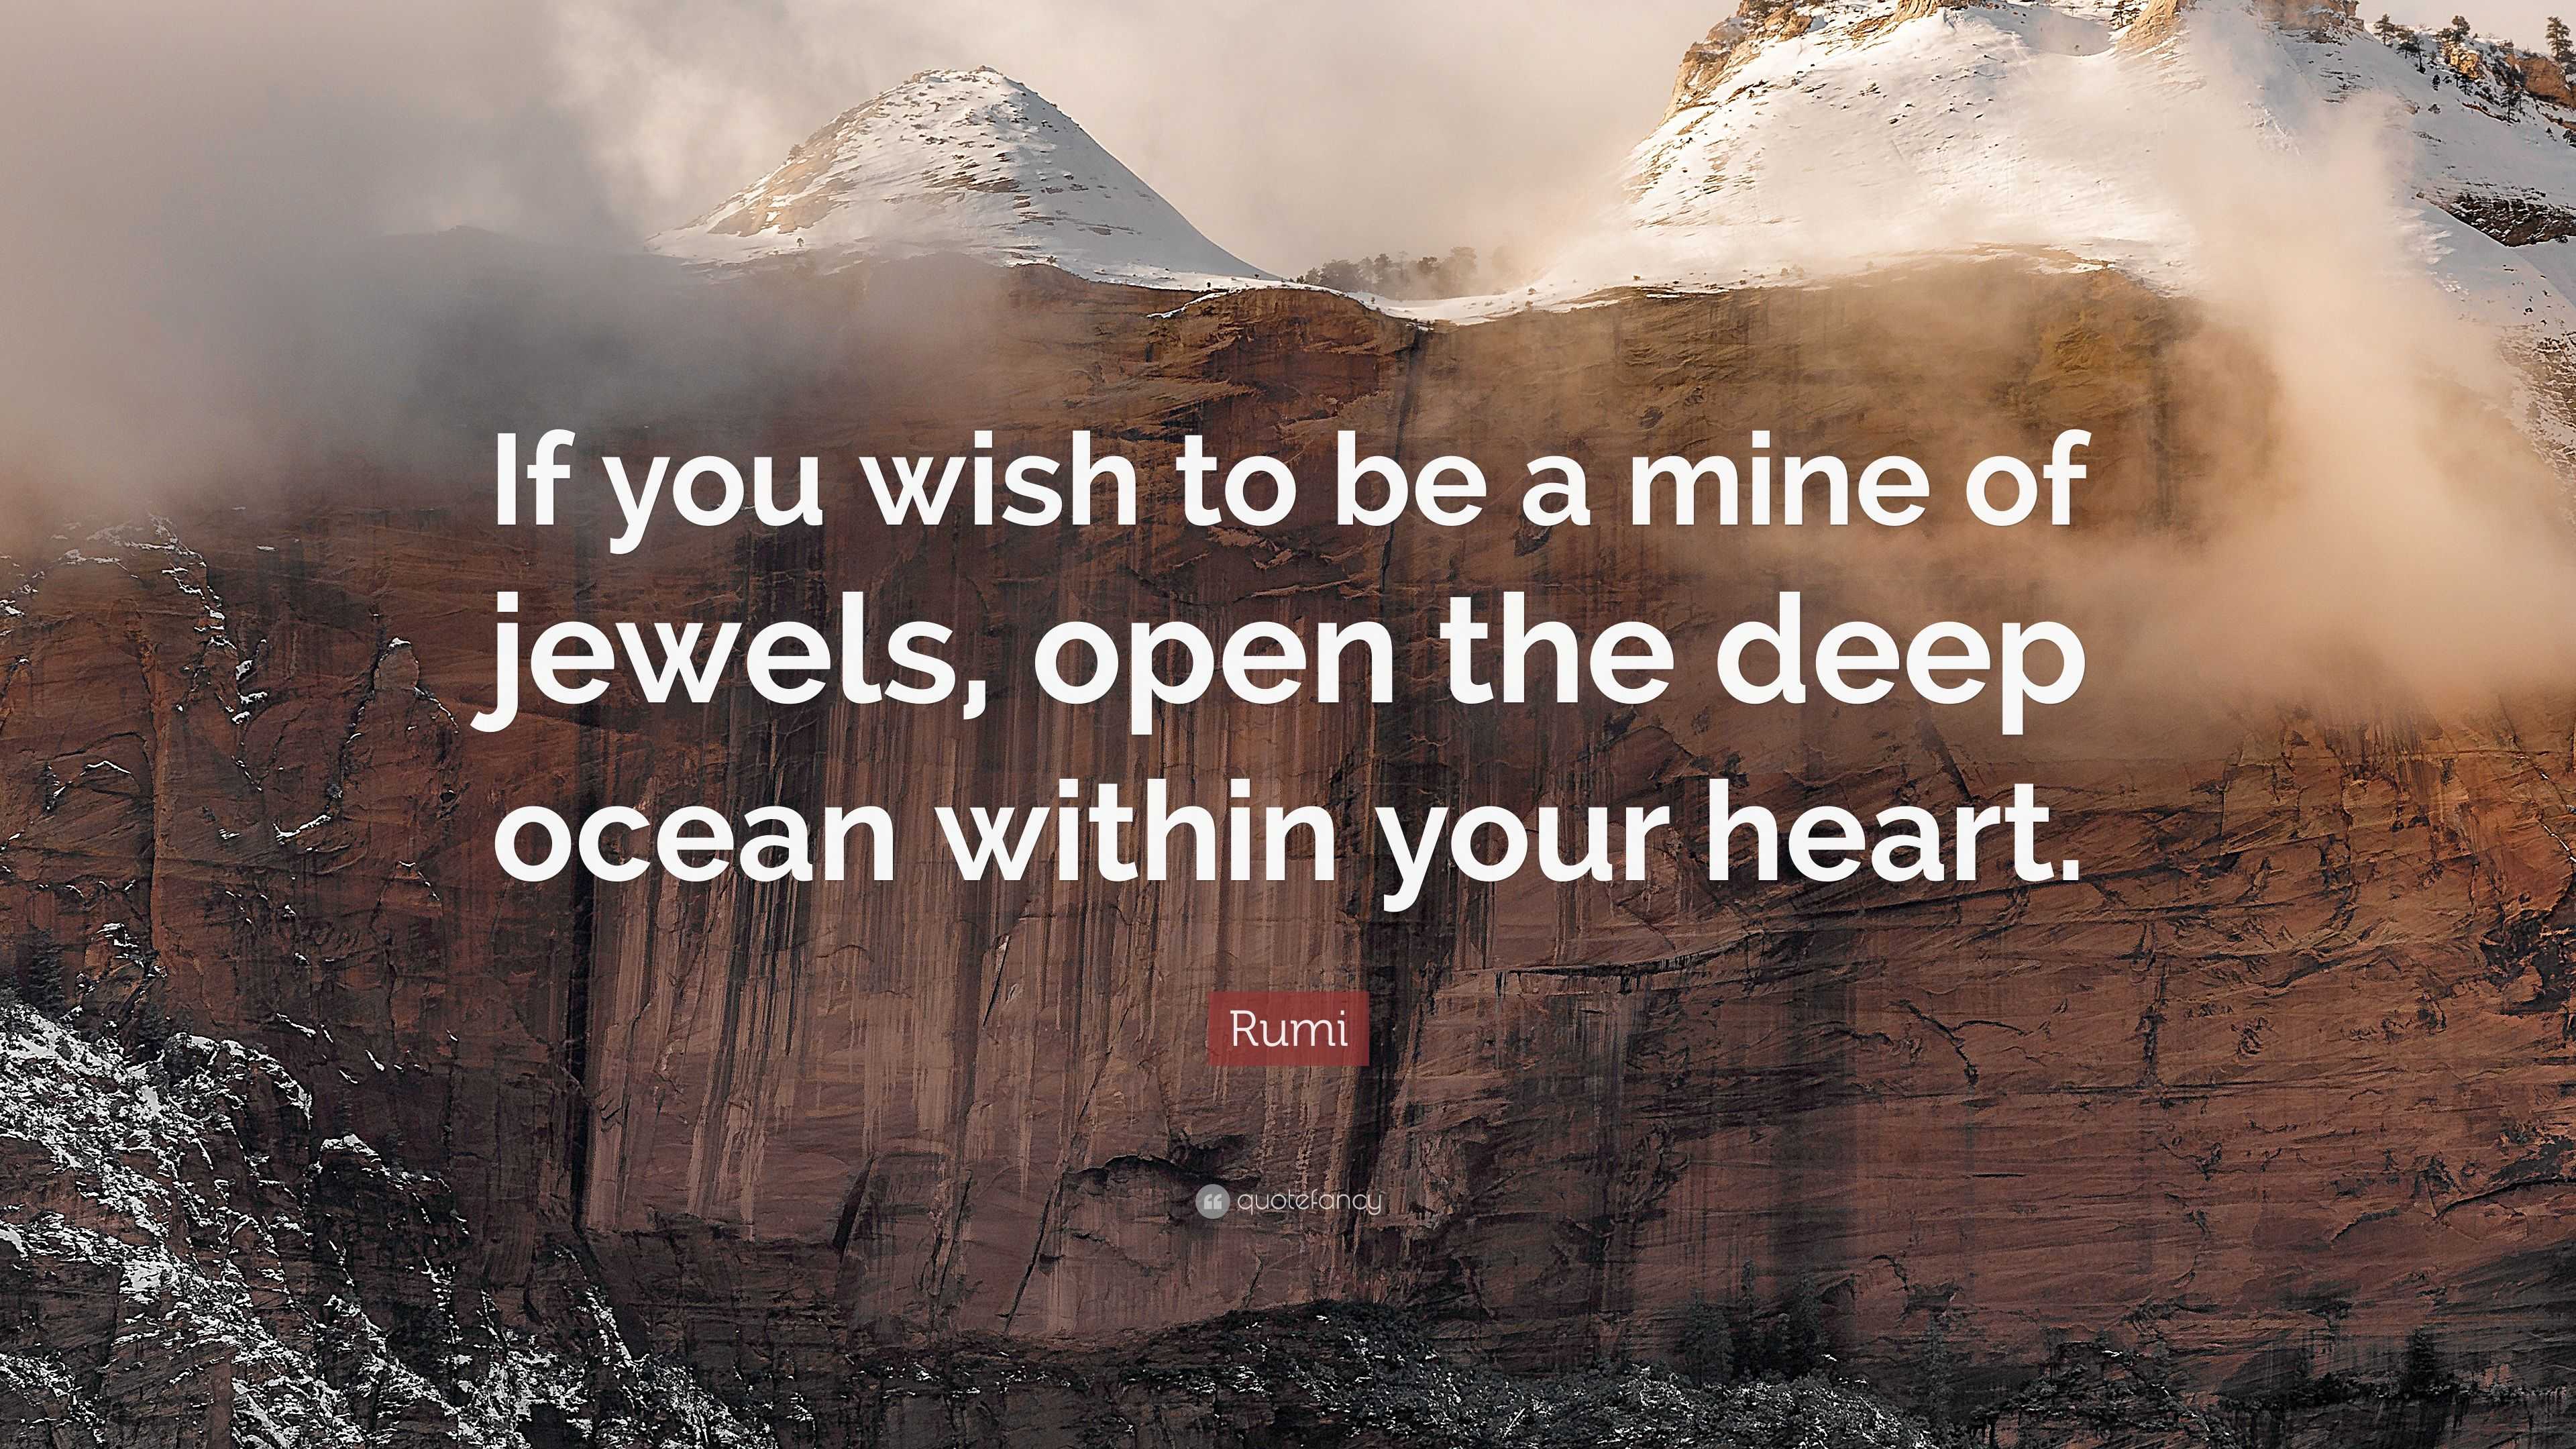 Rumi Quote “If you wish to be a mine of jewels open the